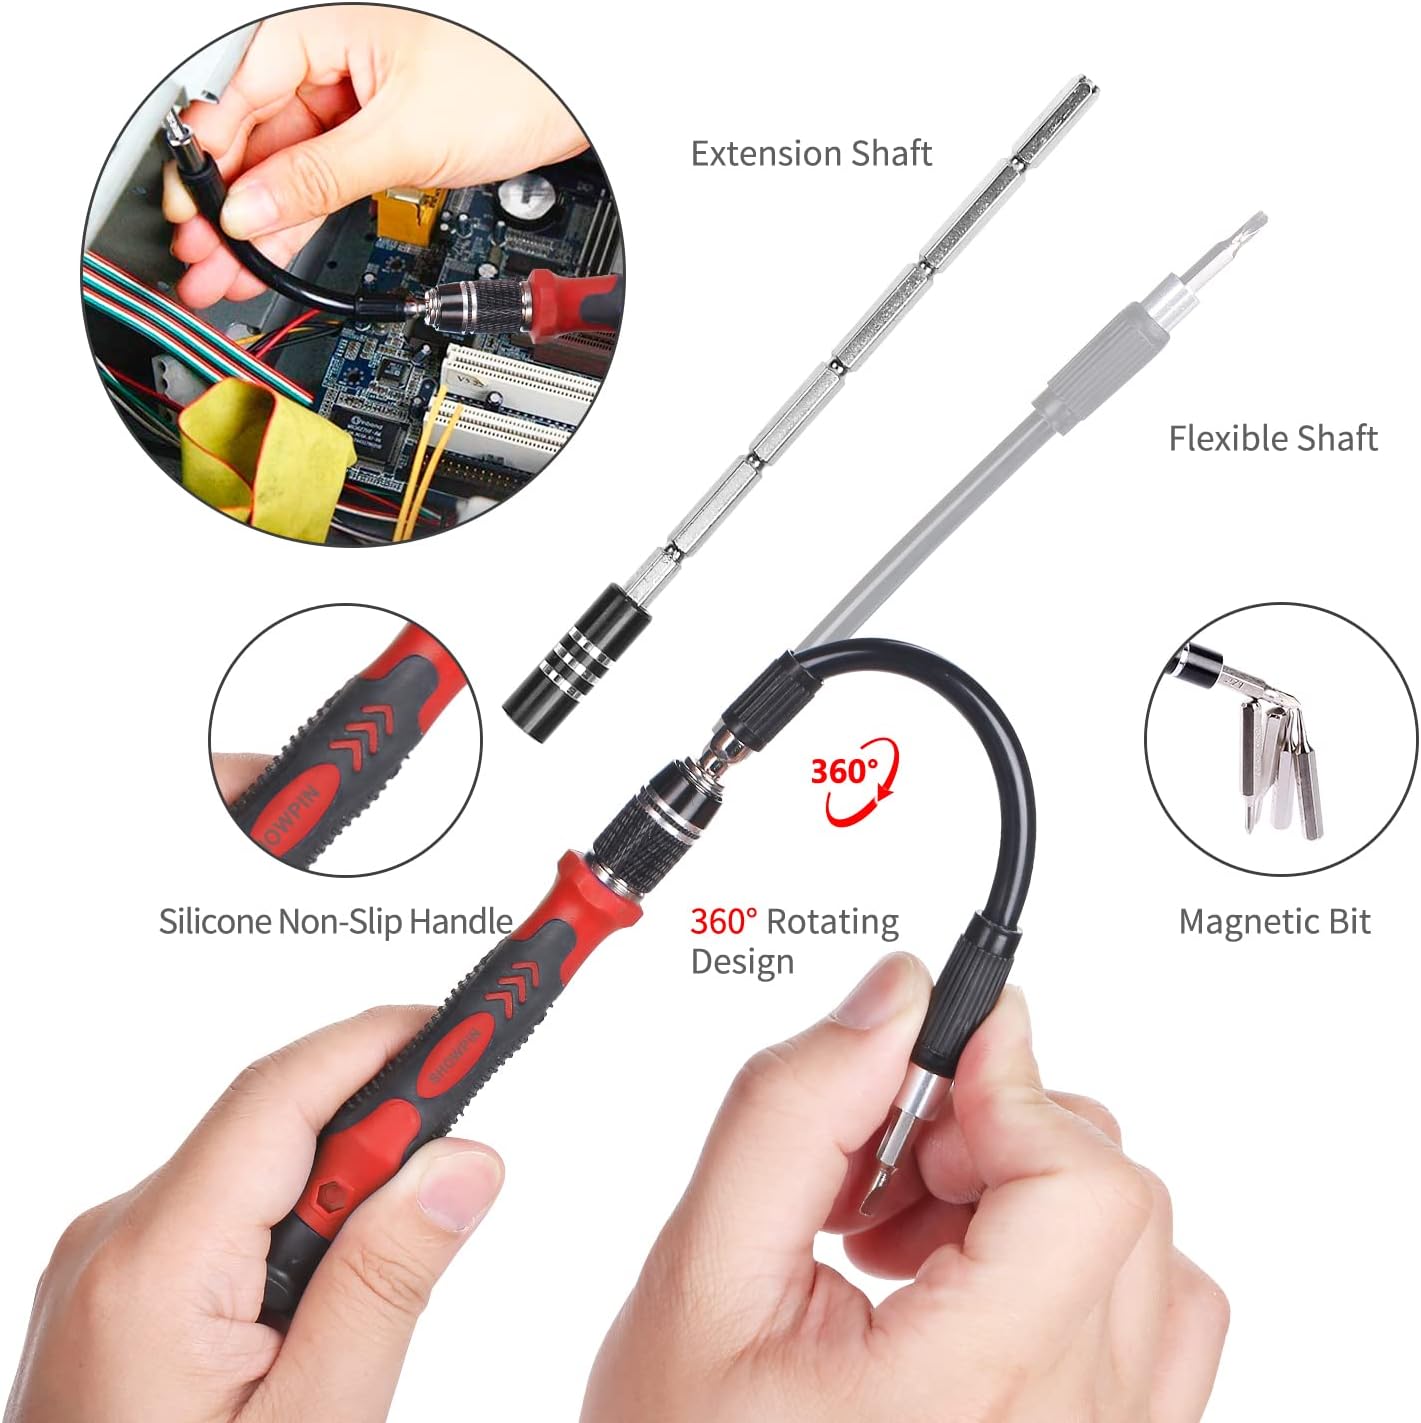 Precision Screwdriver Set, 122 in 1 Electronics Magnetic Repair Tool Kit with Case for Repair Computer, iPhone, PC, Cellphone, Laptop, Nintendo, PS4, Game Console, Watch, Glasses etc (Red)